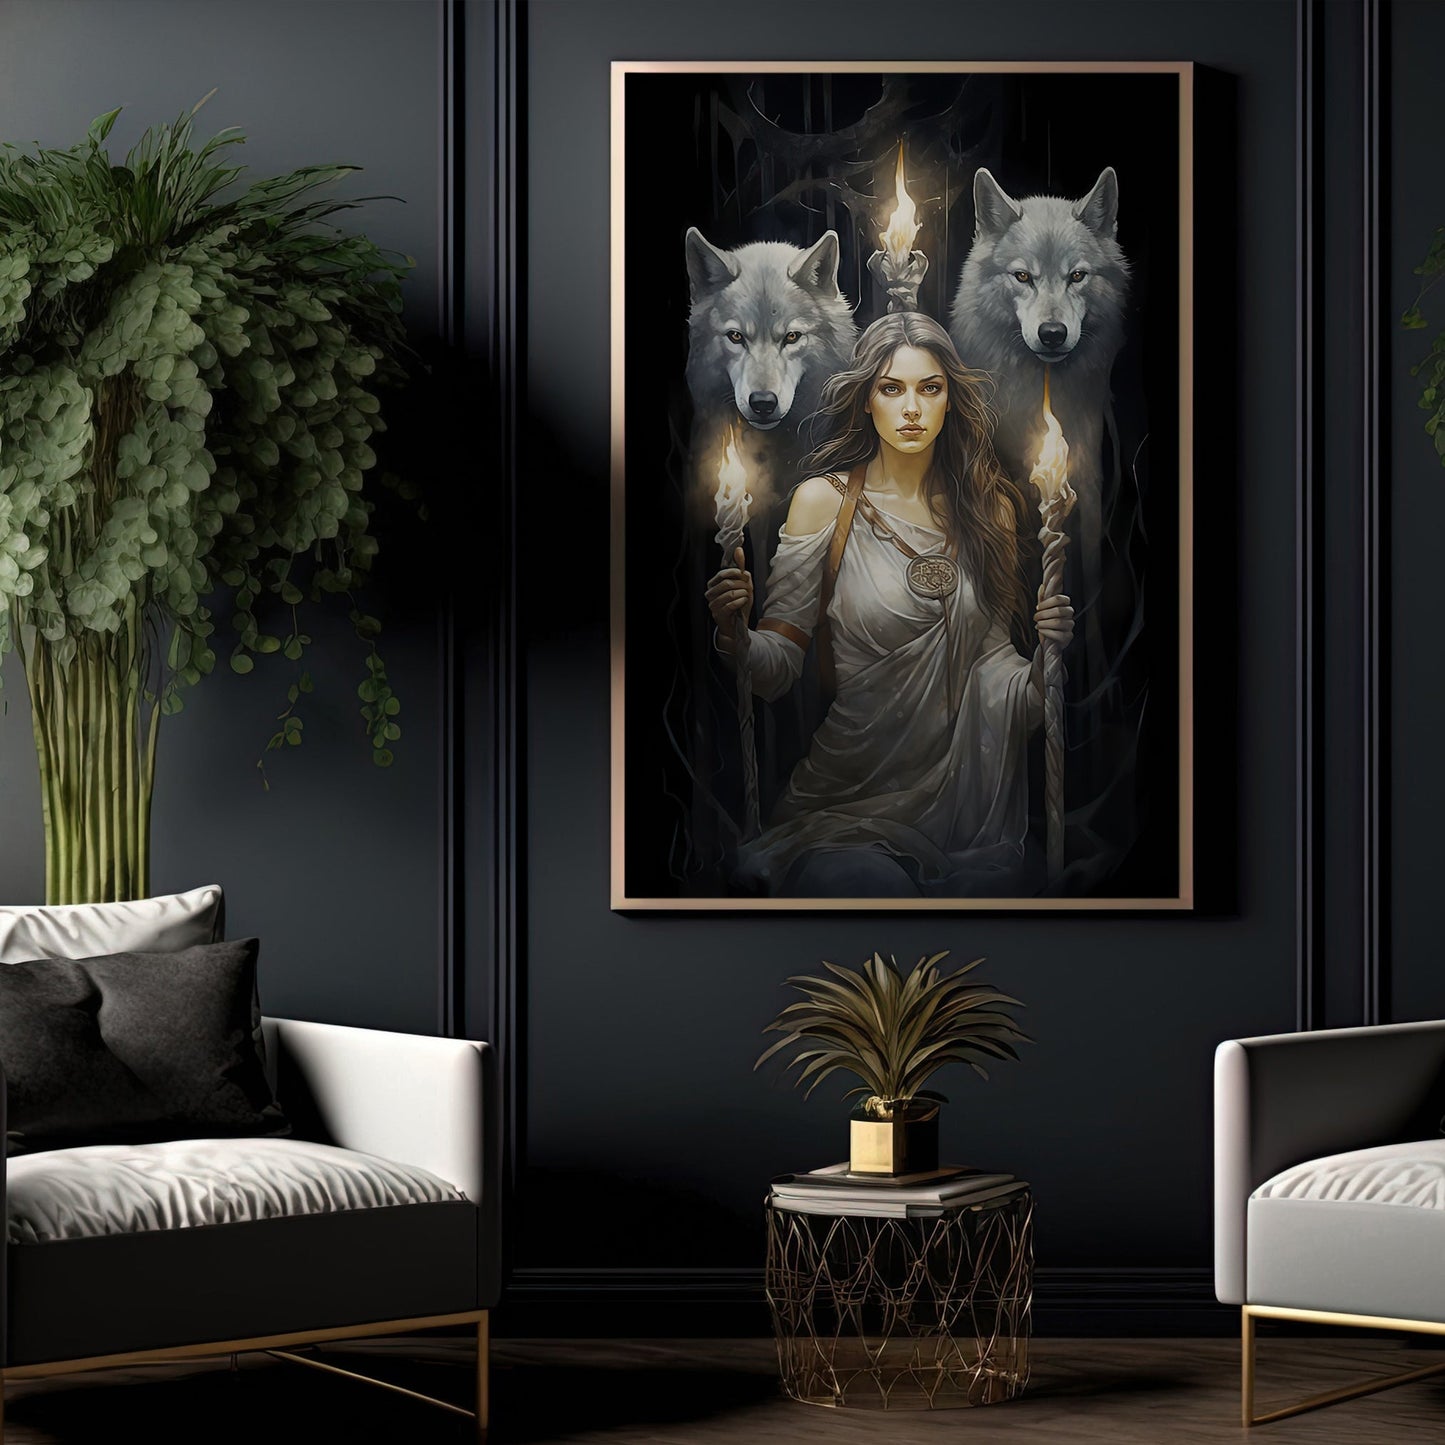 Goddess Protector Of Women With Wolf, Goddess Canvas Painting, Wall Art Decor - Victorian Goddess Poster Gift